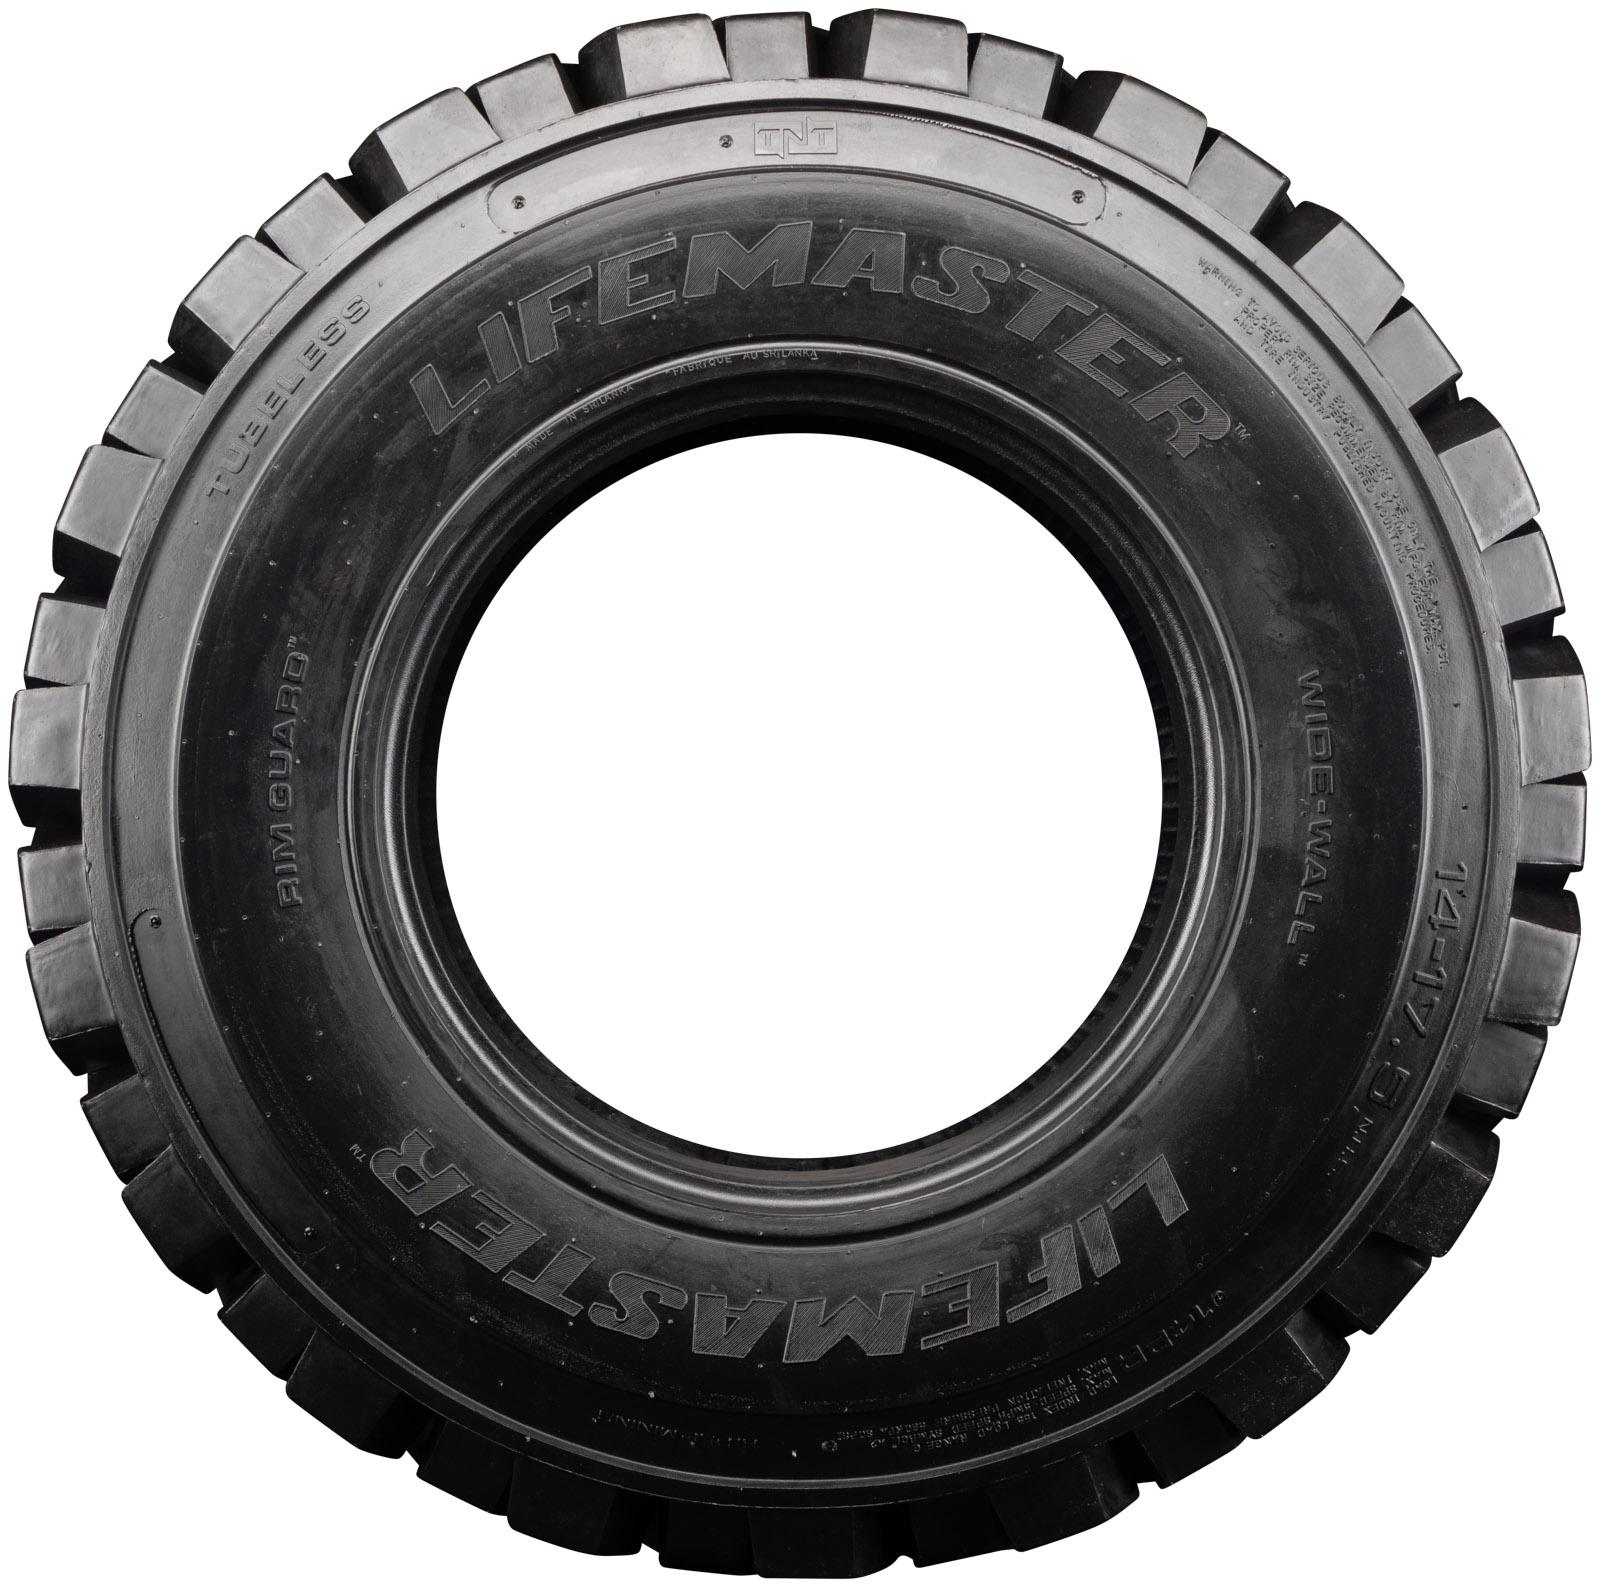 set of 4 14x17.5 14-ply lifemaster skid steer extreme duty tires